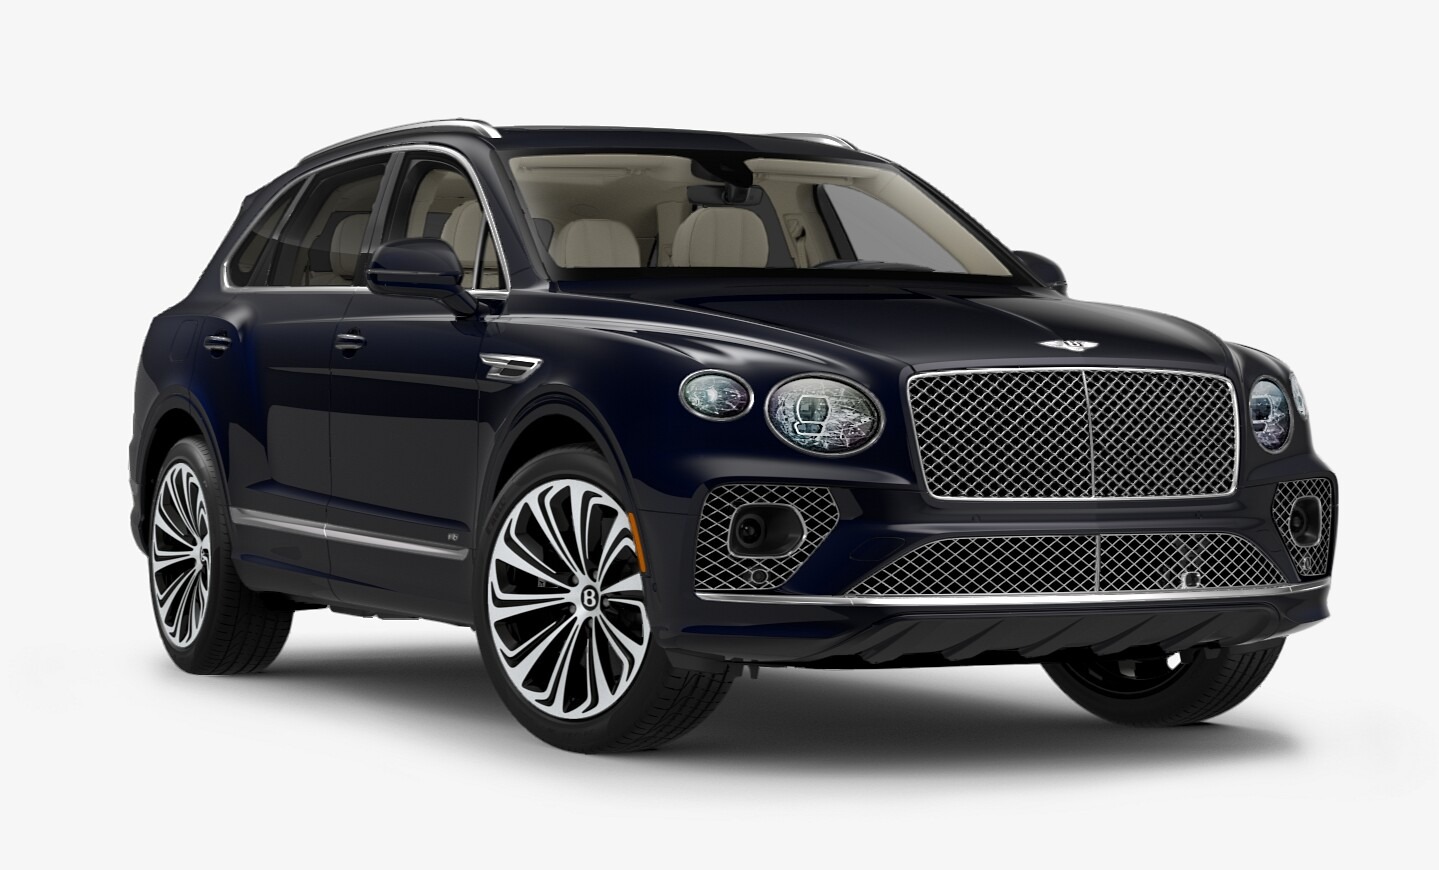 New 2022 Bentley Bentayga V8 for sale Sold at Pagani of Greenwich in Greenwich CT 06830 1